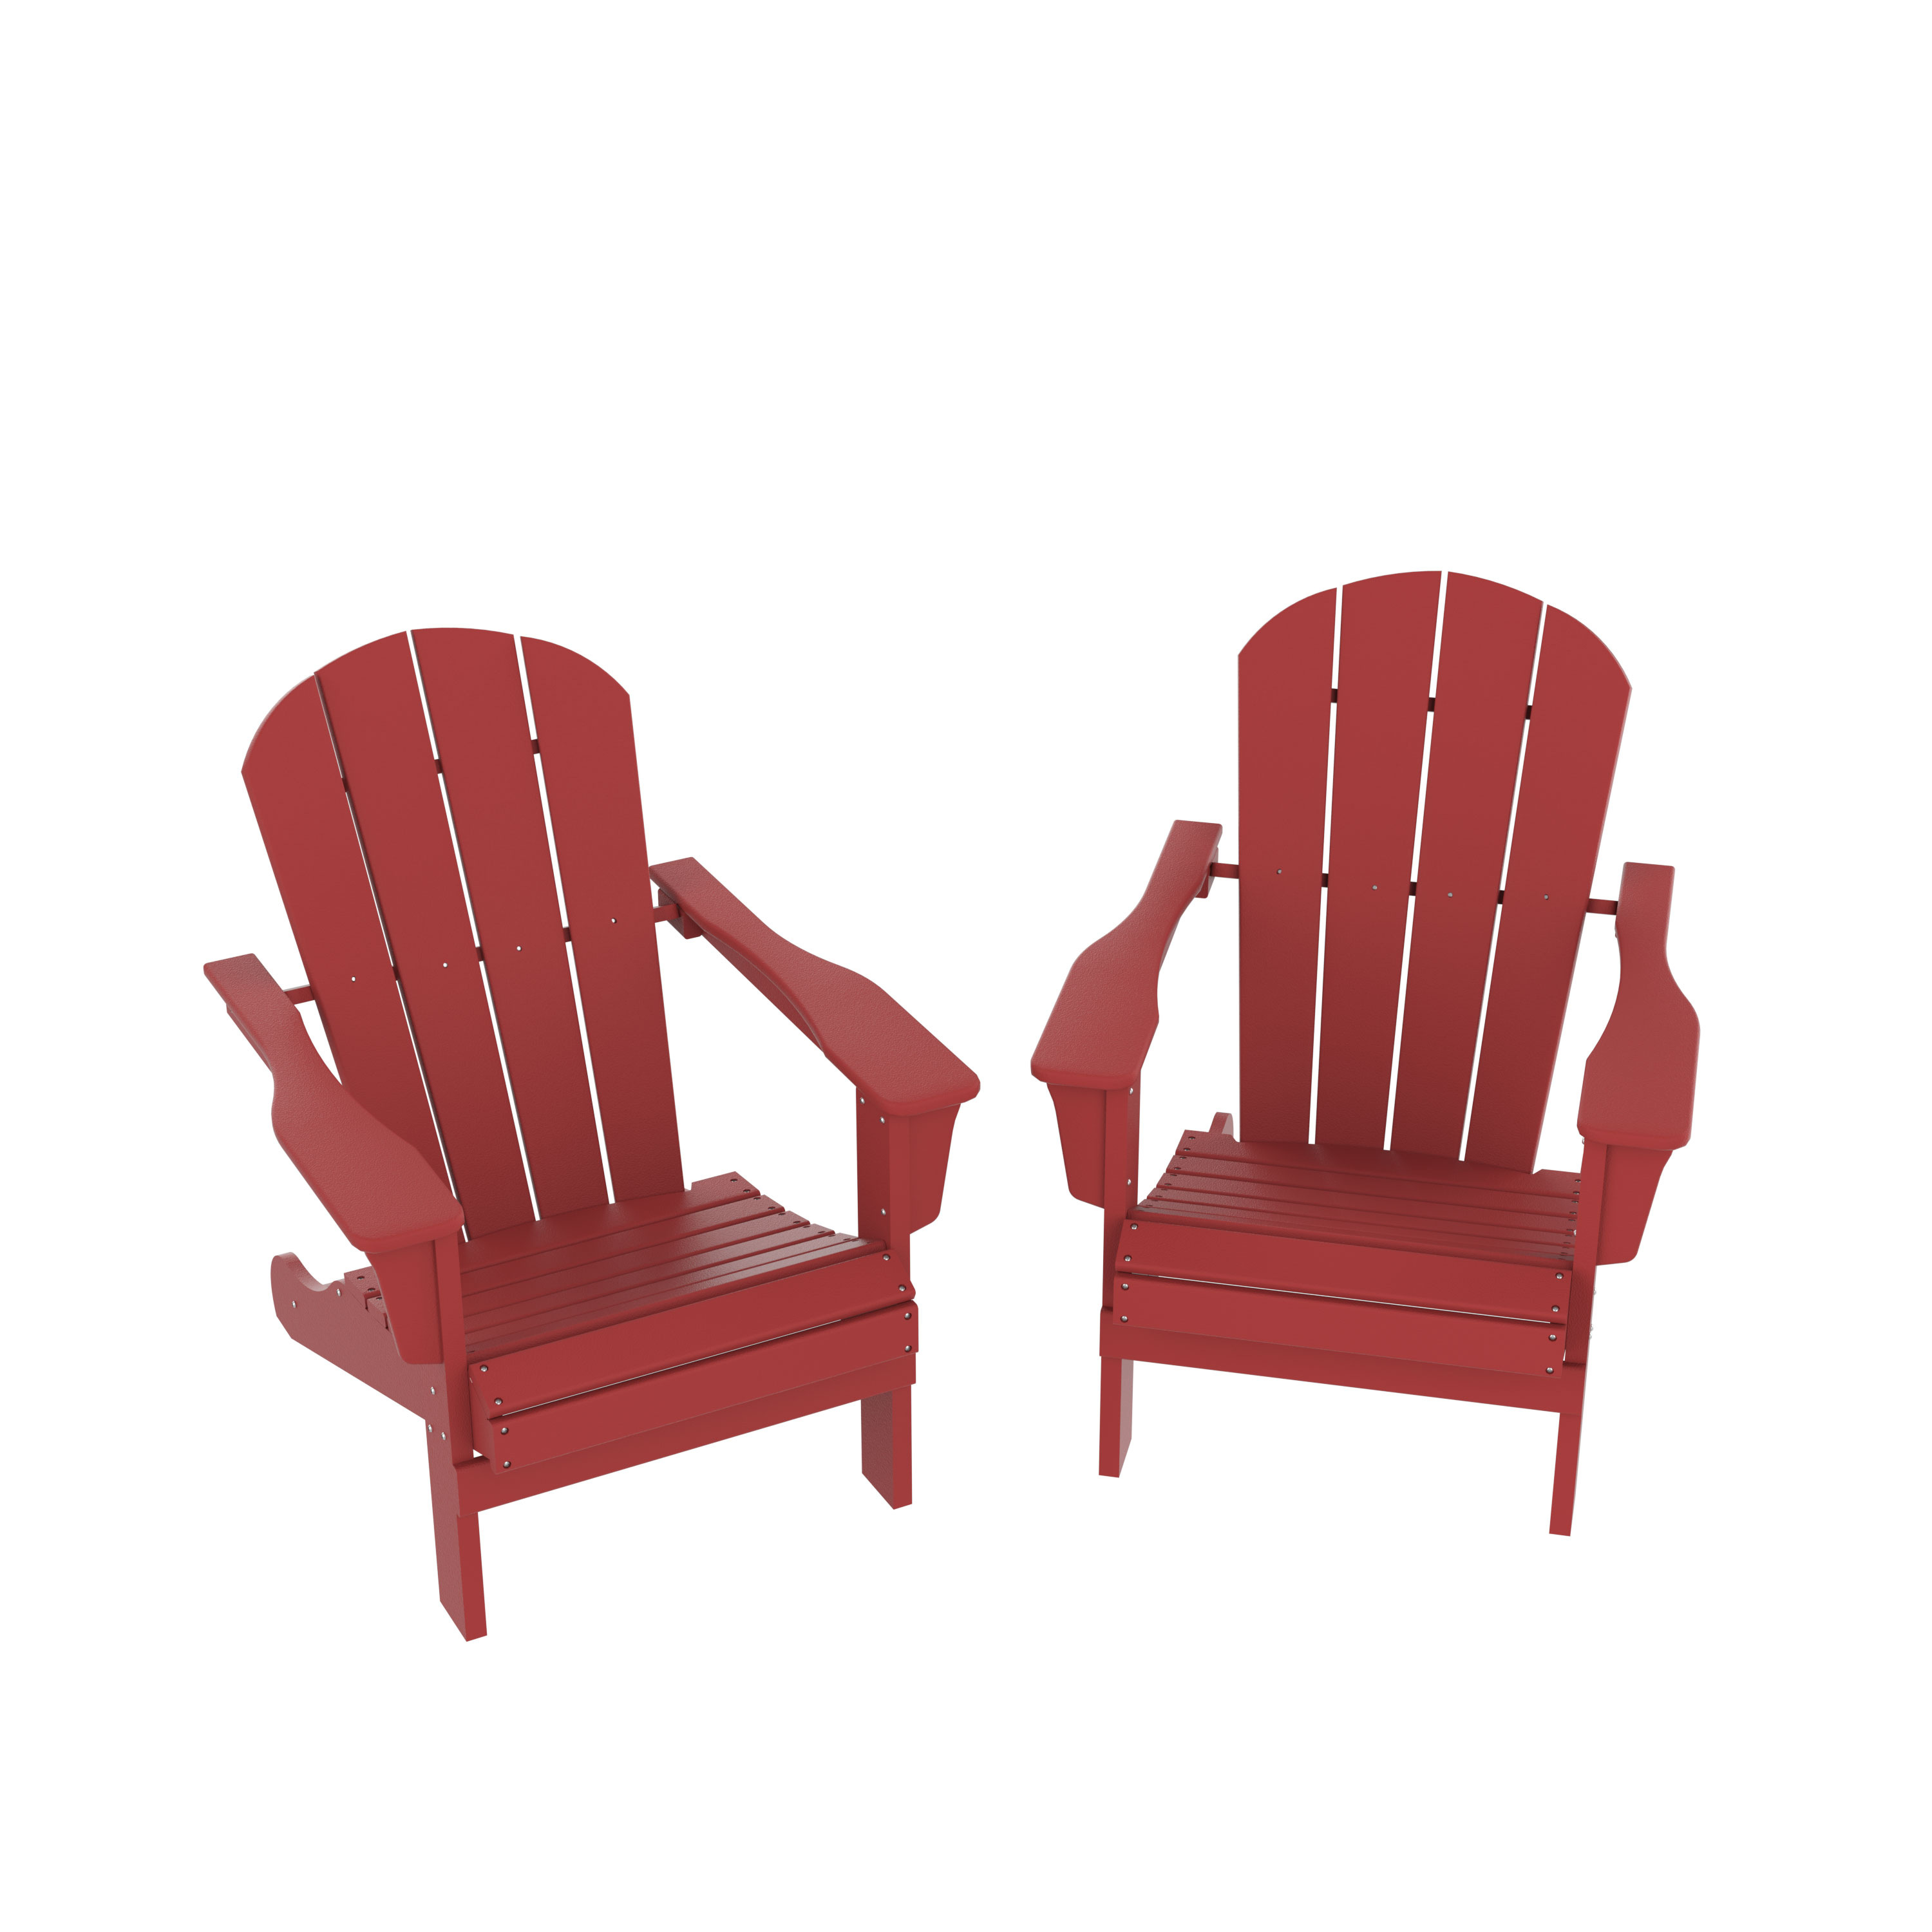 HDPE Adirondack Chair, Fire Pit Chairs, Sand Chair, Patio Outdoor Chairs,DPE Plastic Resin Deck Chair, lawn chairs, Adult Size ,Weather Resistant for Patio/ Backyard/Garden, Red, Set of 2 - image 4 of 4